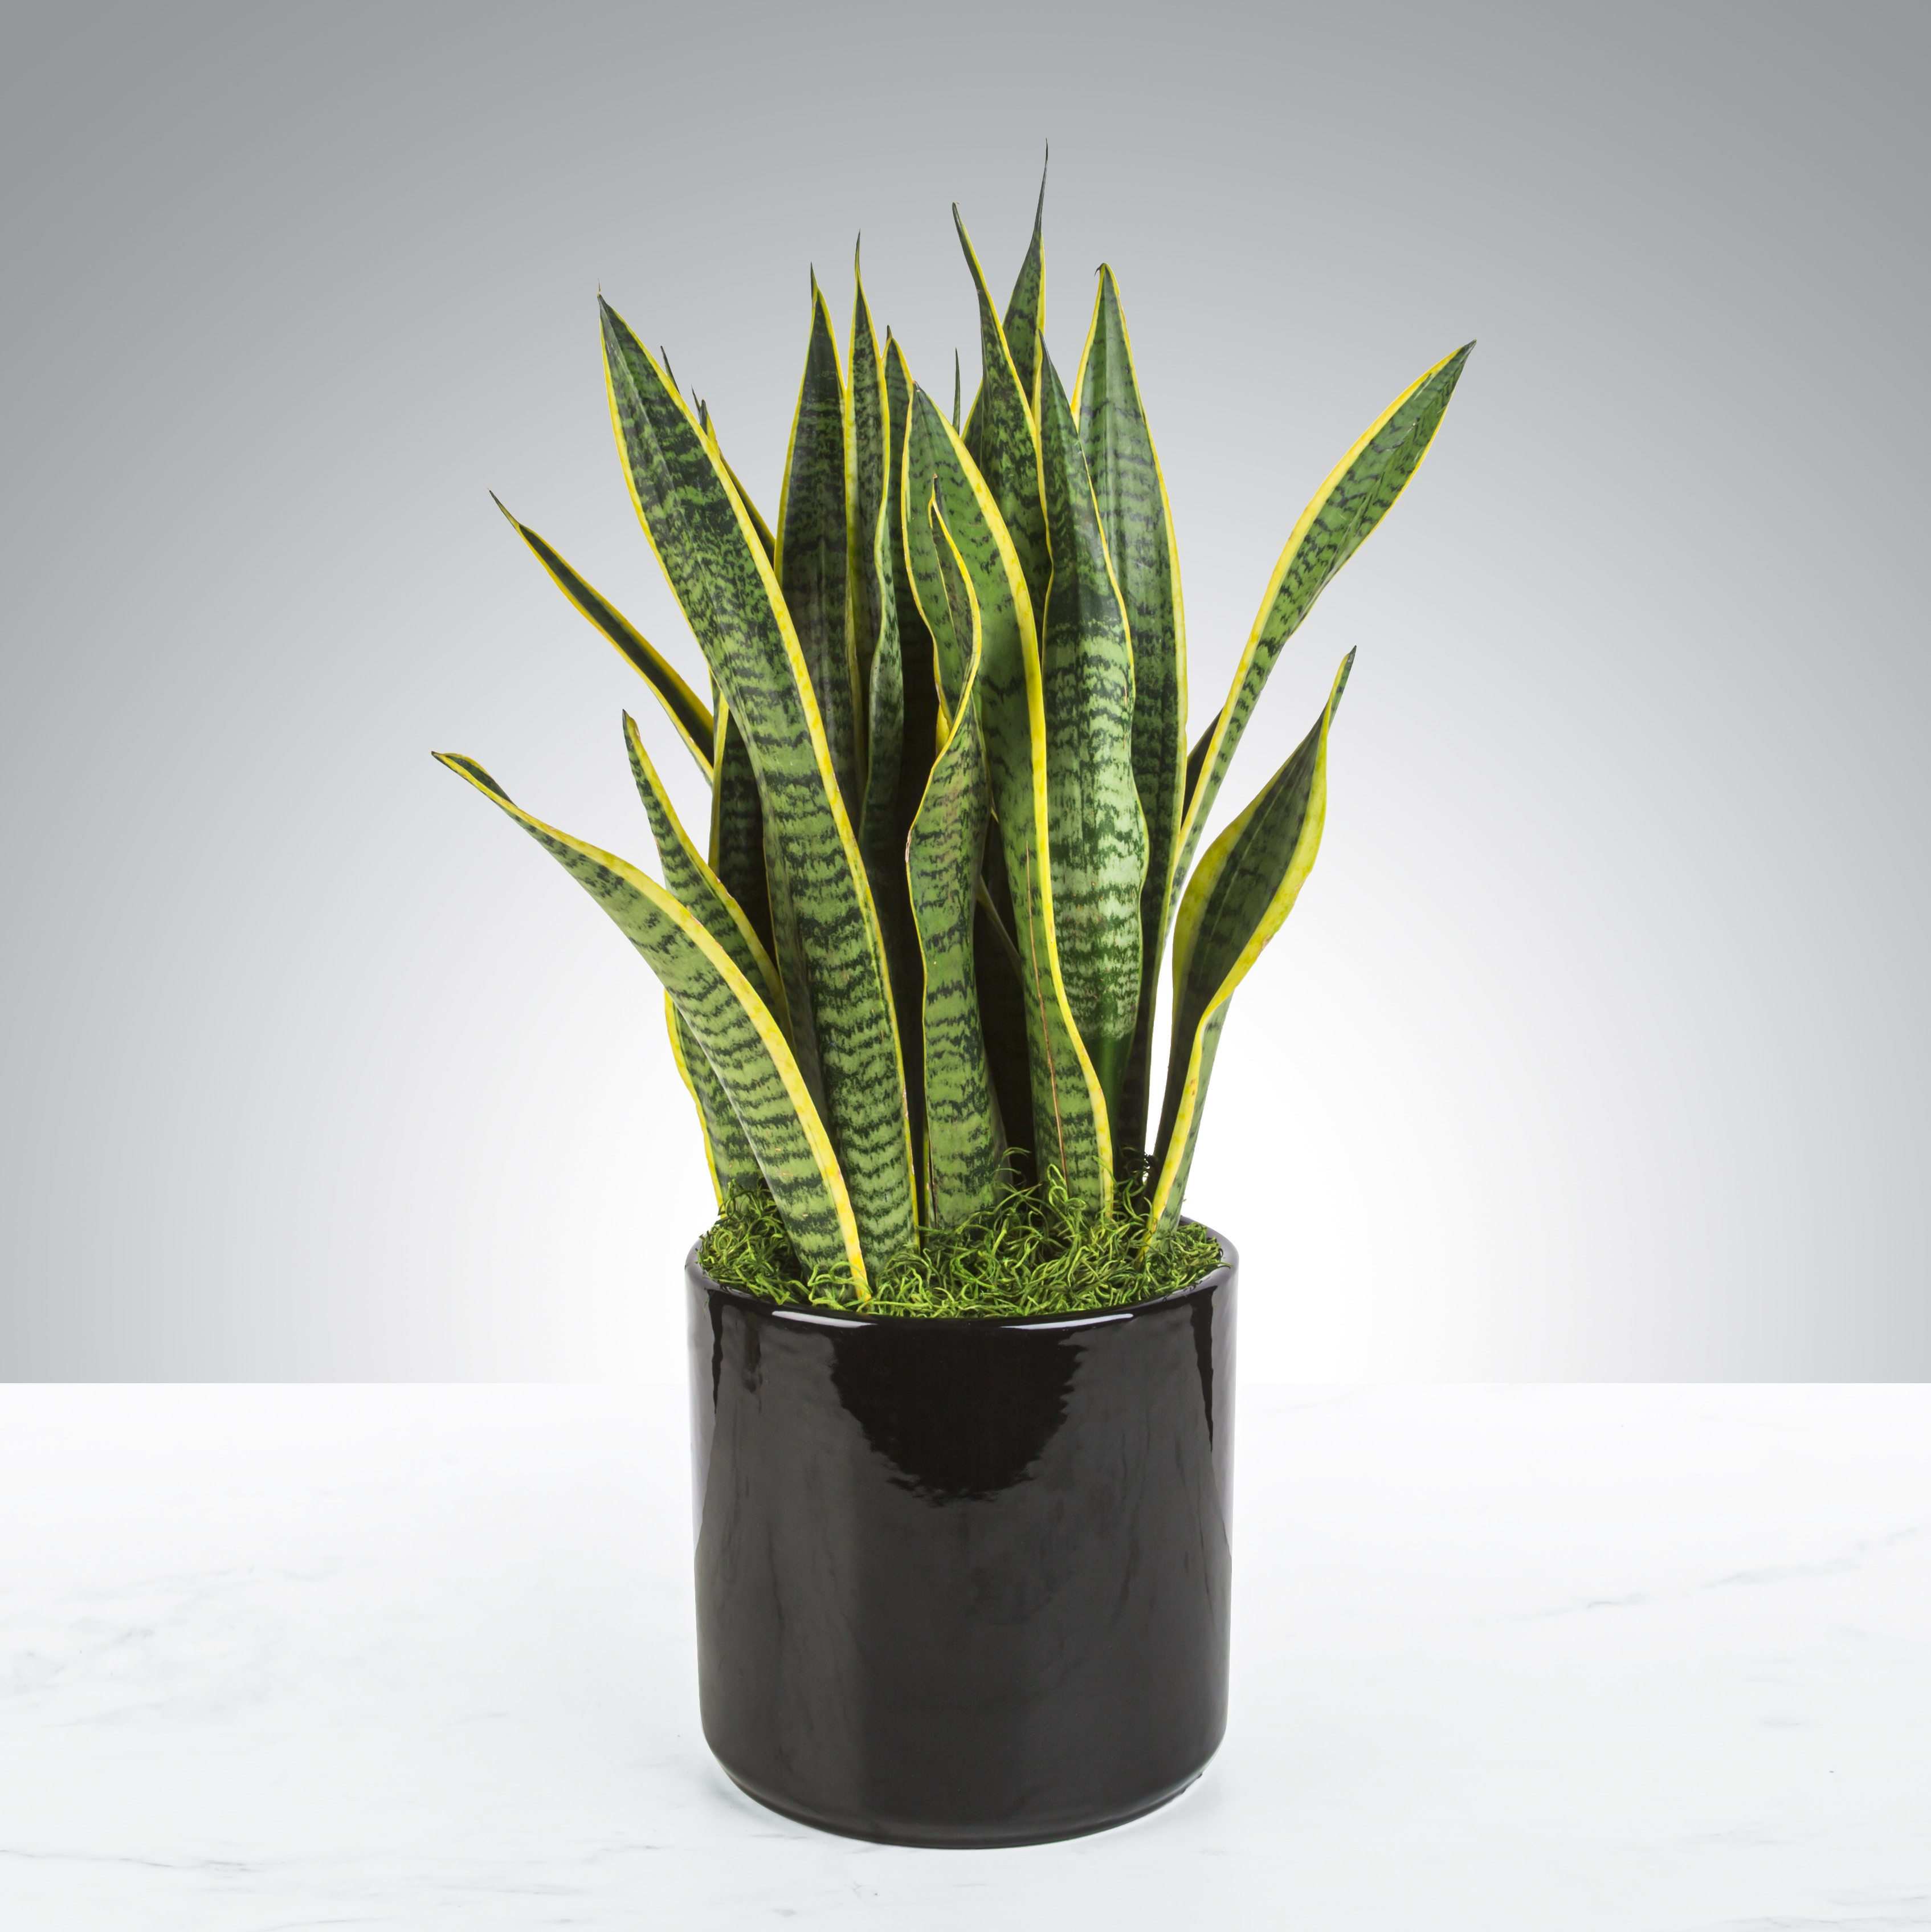 Snake Plant - A large sized Snake Plant in a modern pot. Snake Plants are said to improve air quality by removing toxins and are near impossible to kill! No green thumb necessary!  